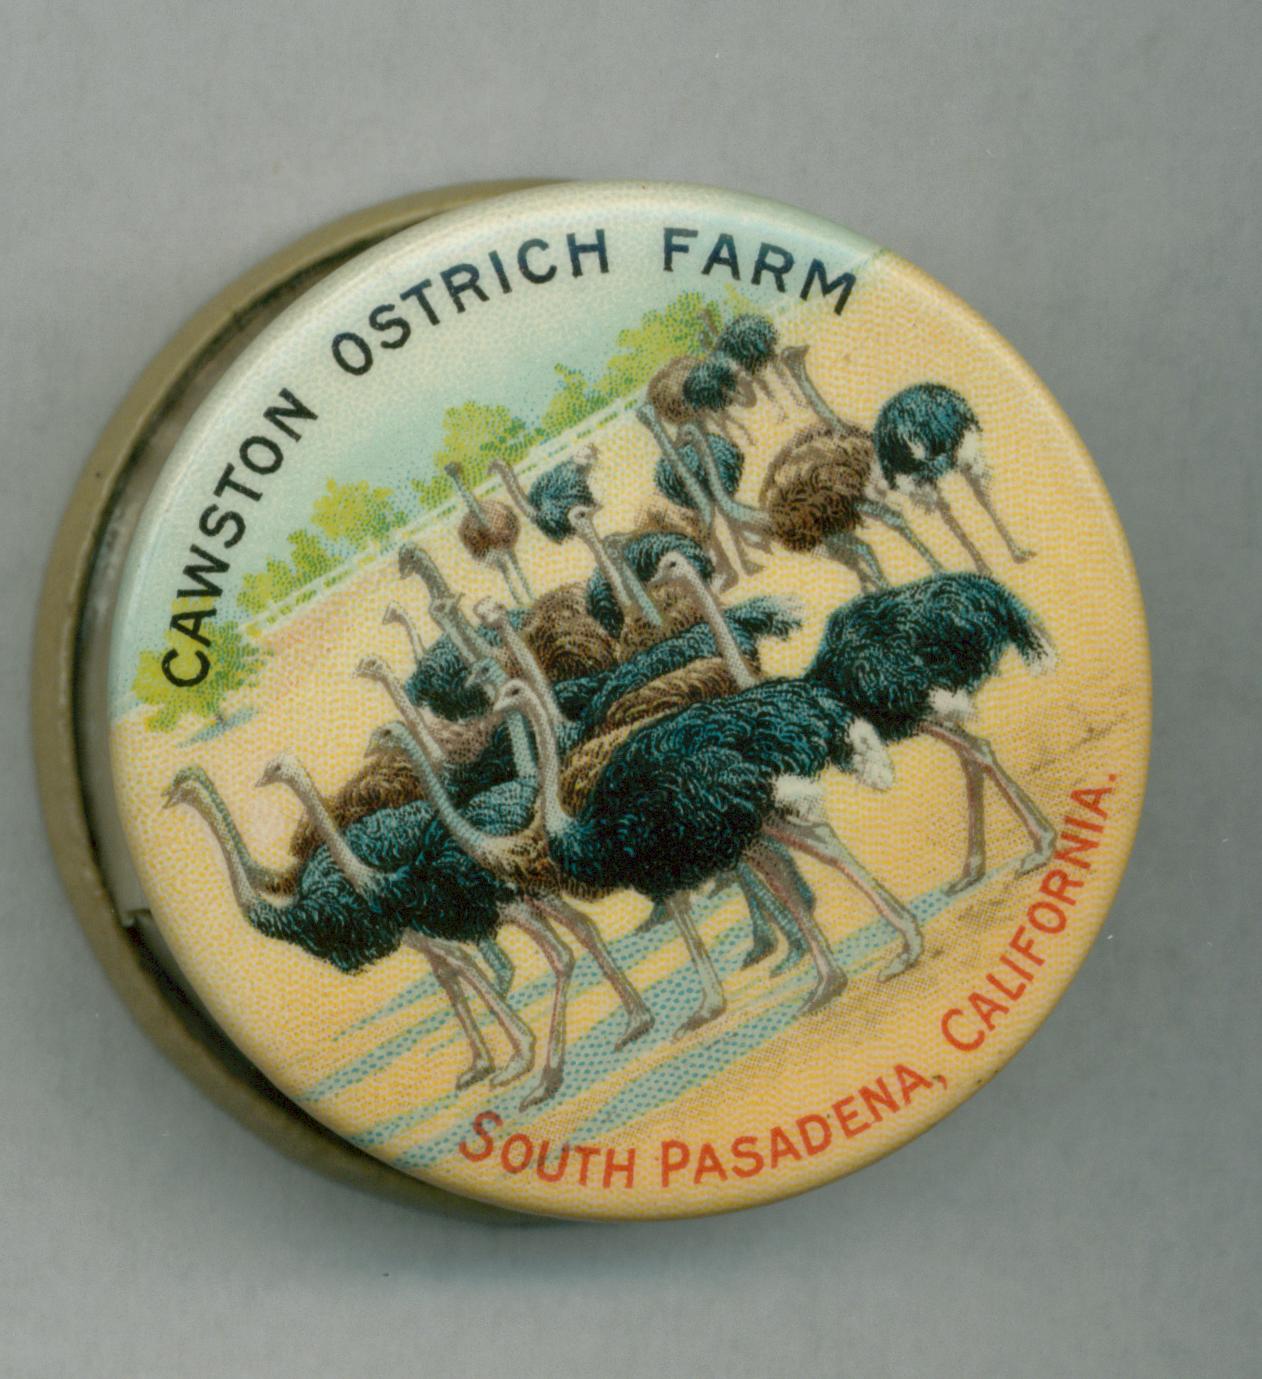 Souvenir tape measure from Cawston's Ostrich Farm, South Pasadena, California.  Imprint of Whitehead and Hoag, Newark, New Jersey. Image of single ostrich head on front; back shows group or flock of ostriches at the farm.